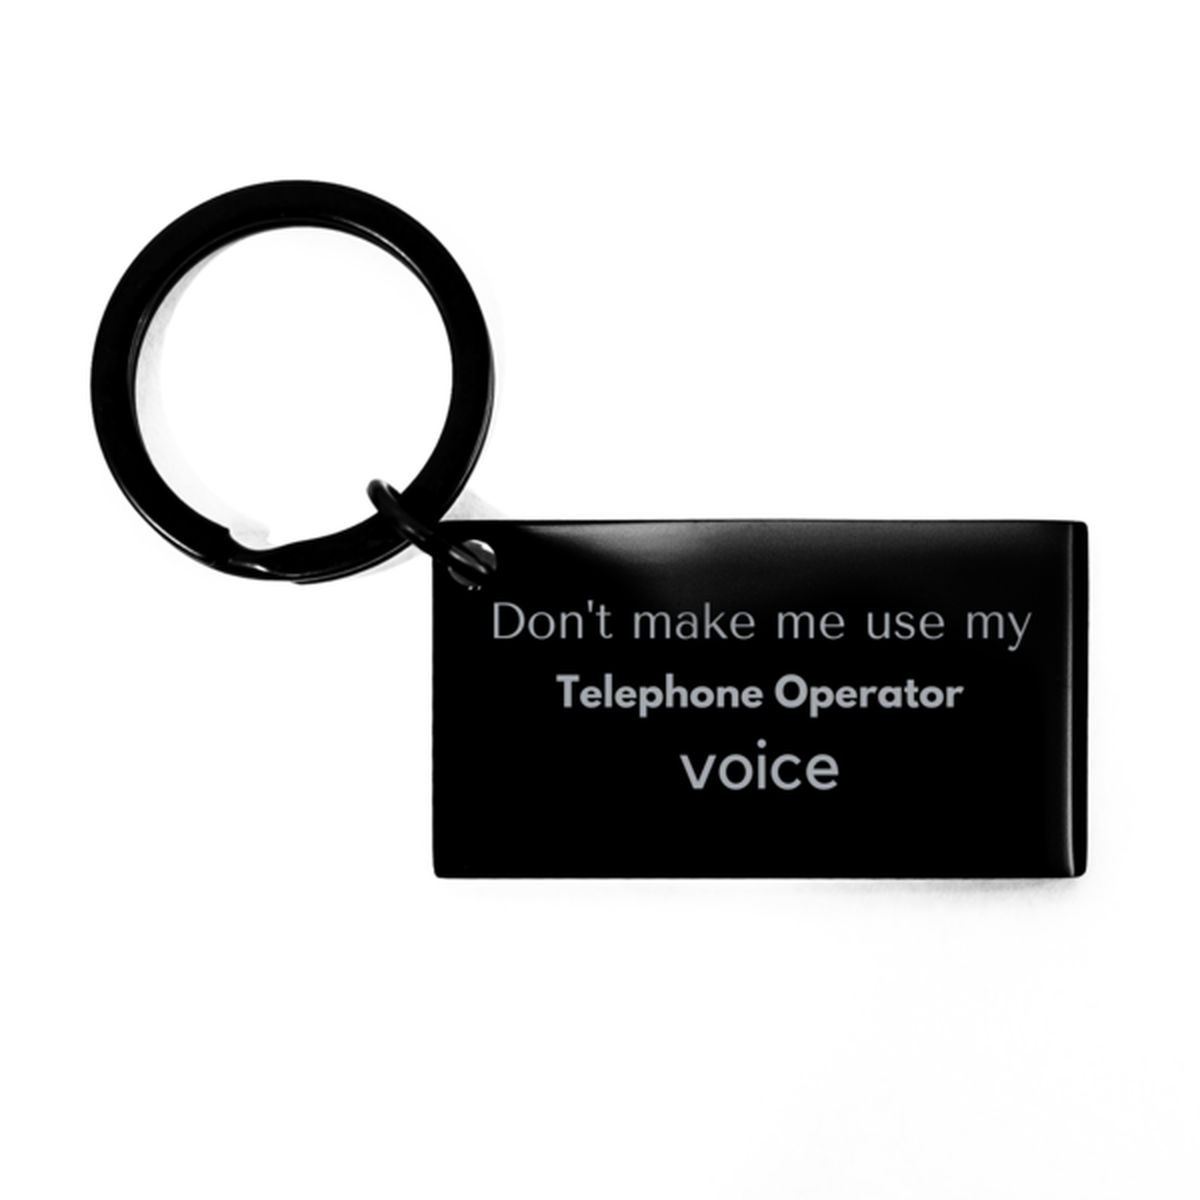 Don't make me use my Telephone Operator voice, Sarcasm Telephone Operator Gifts, Christmas Telephone Operator Keychain Birthday Unique Gifts For Telephone Operator Coworkers, Men, Women, Colleague, Friends